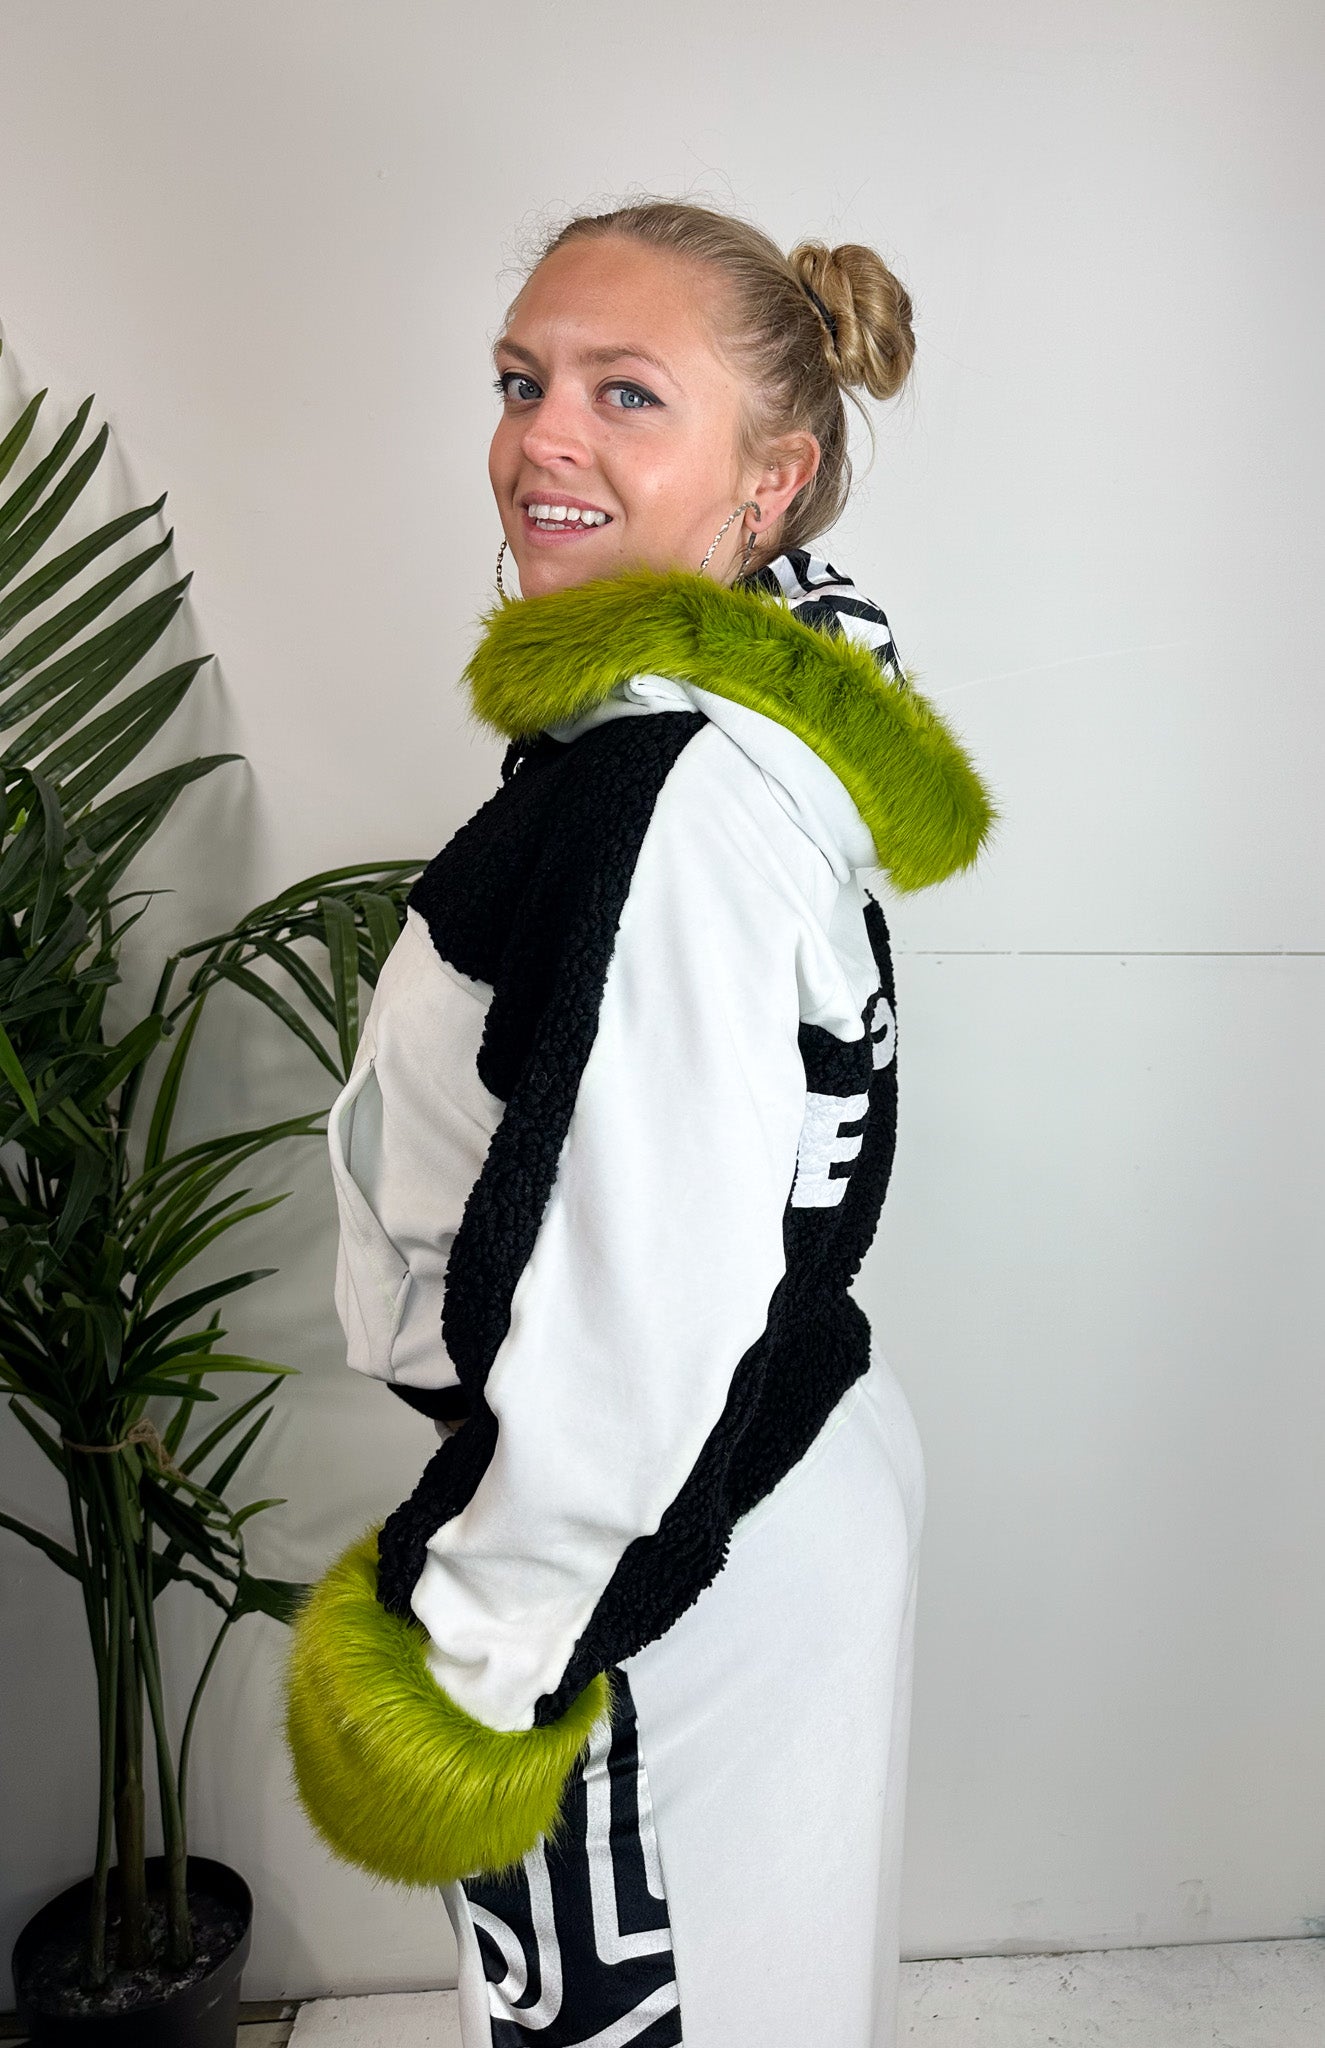 Emerging luxury streetwear designer Bellisa x wears: Bellisa X White and Black Velour Cropped Hoodie with Lime Green Faux Fur Cuffs and Hood. Unique summer fashion hoodie